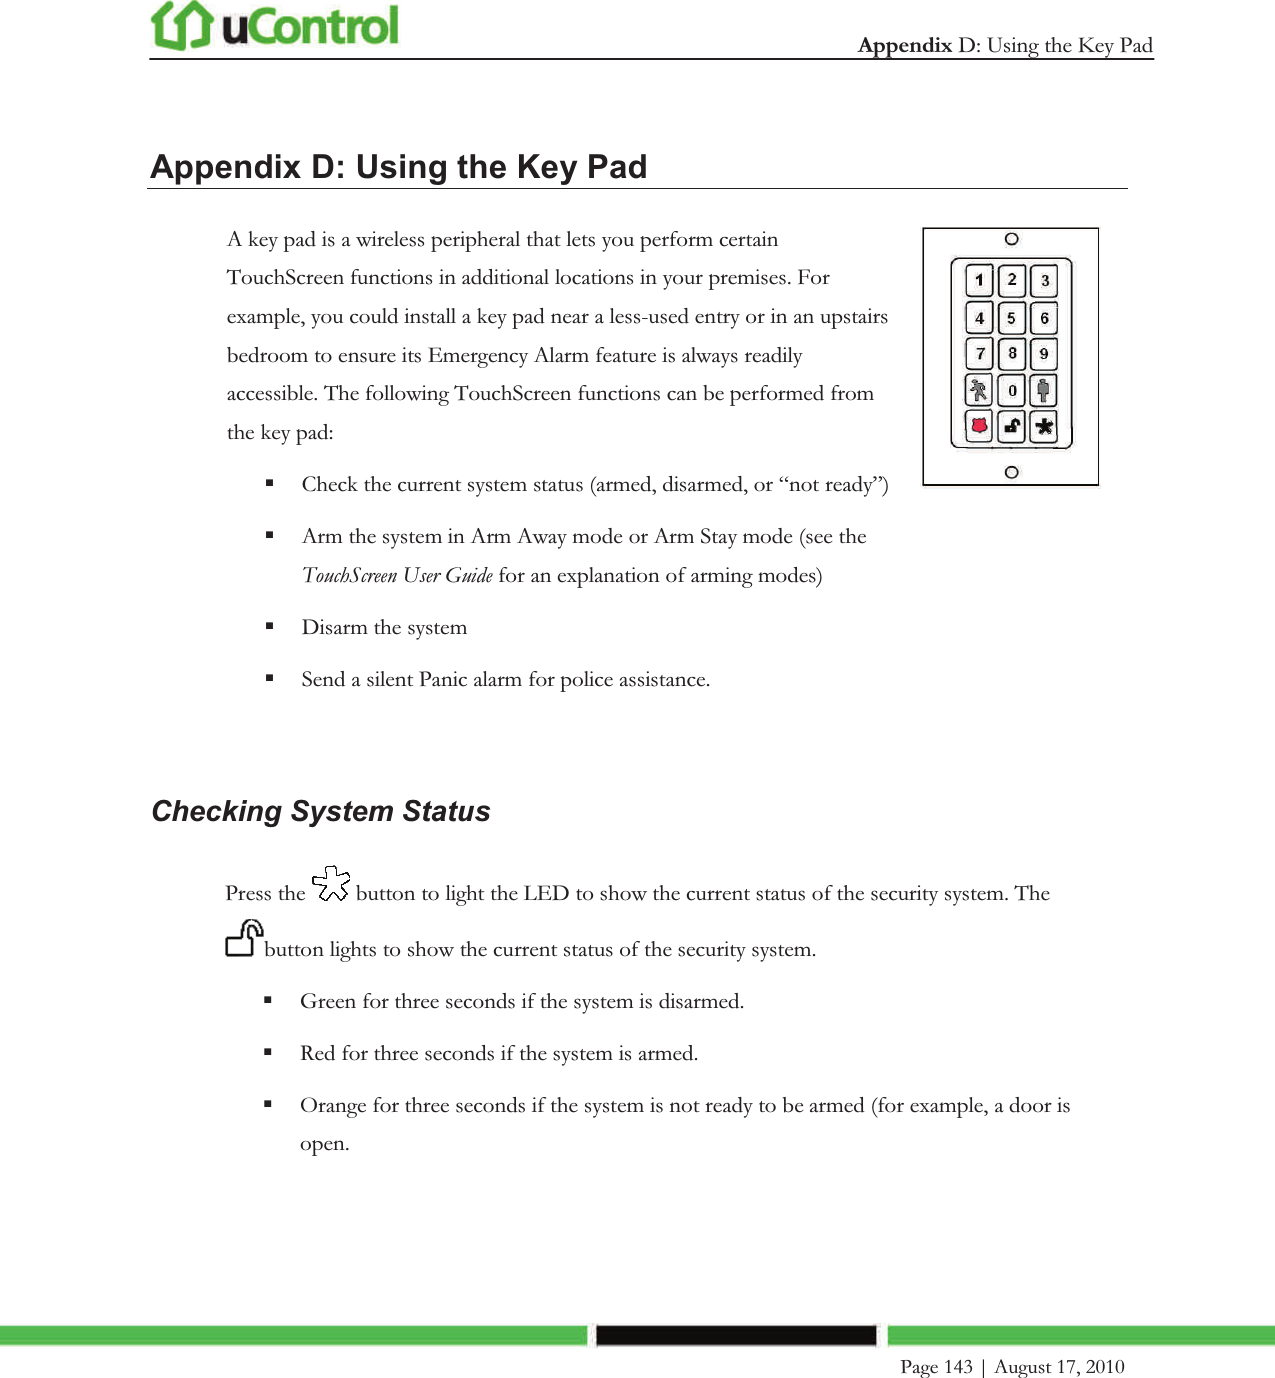  Appendix D: Using the Key Pad     Page 143 | August 17, 2010   Appendix D: Using the Key Pad A key pad is a wireless peripheral that lets you perform certain TouchScreen functions in additional locations in your premises. For example, you could install a key pad near a less-used entry or in an upstairs bedroom to ensure its Emergency Alarm feature is always readily accessible. The following TouchScreen functions can be performed from the key pad:  Check the current system status (armed, disarmed, or “not ready”)  Arm the system in Arm Away mode or Arm Stay mode (see the TouchScreen User Guide for an explanation of arming modes)  Disarm the system  Send a silent Panic alarm for police assistance.    Checking System Status Press the   button to light the LED to show the current status of the security system. The button lights to show the current status of the security system.  Green for three seconds if the system is disarmed.  Red for three seconds if the system is armed.  Orange for three seconds if the system is not ready to be armed (for example, a door is open. 